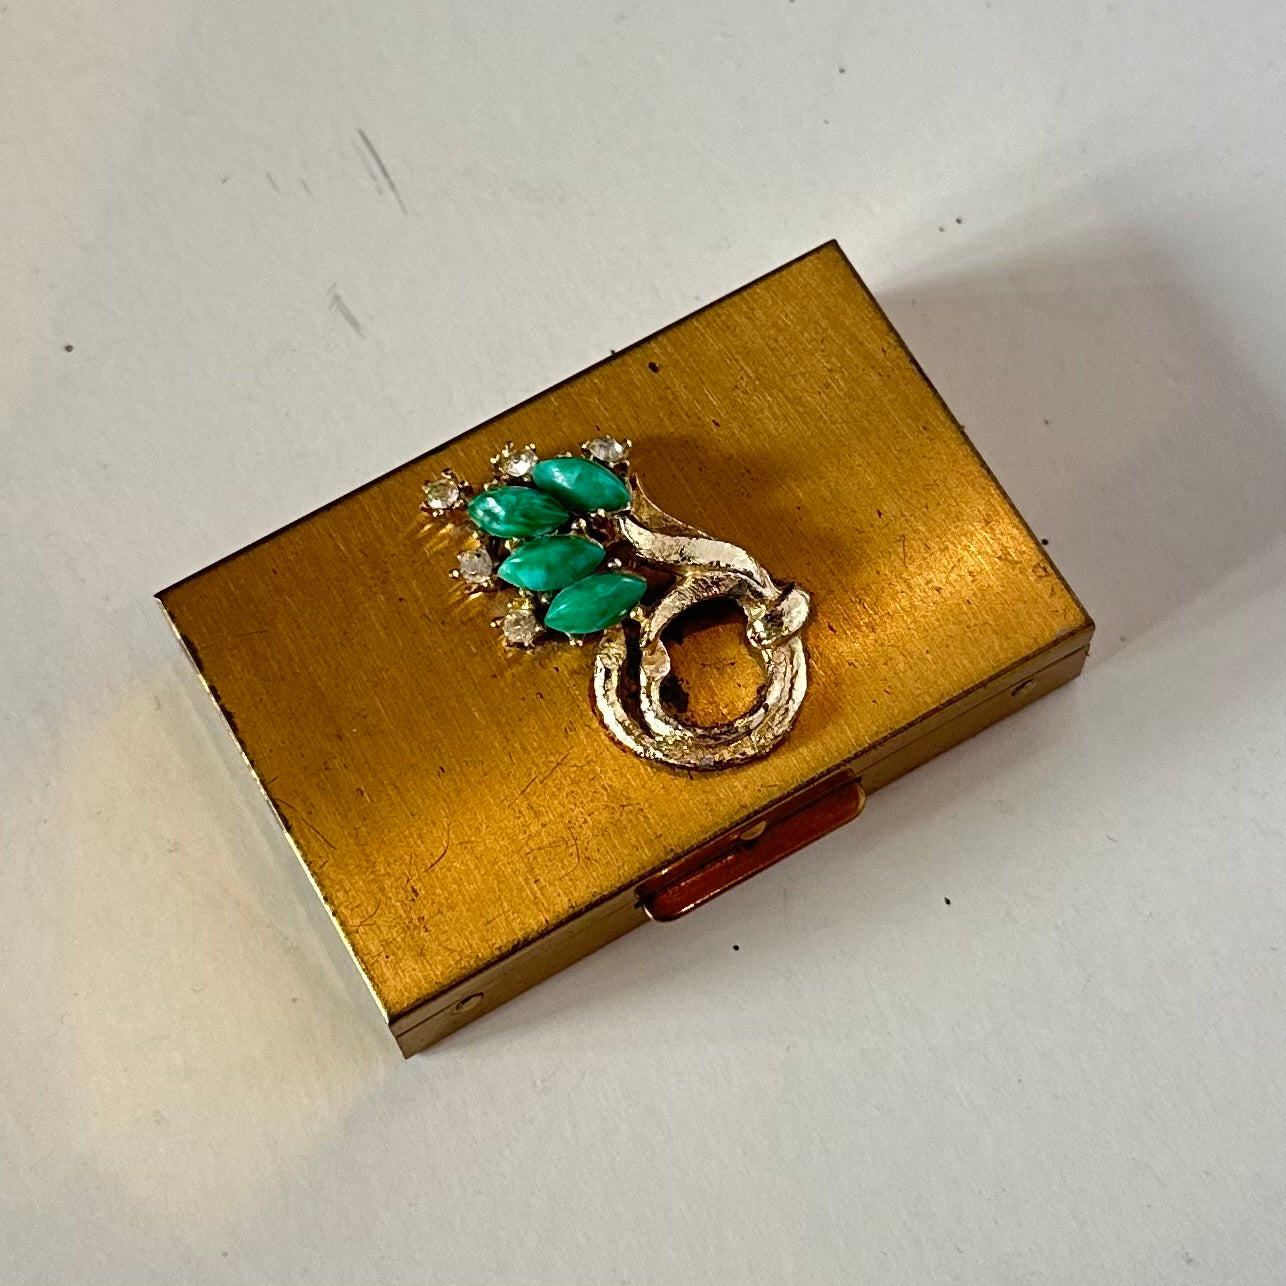 Vintage Gold Tone Rectangle Jade Jeweled Compact